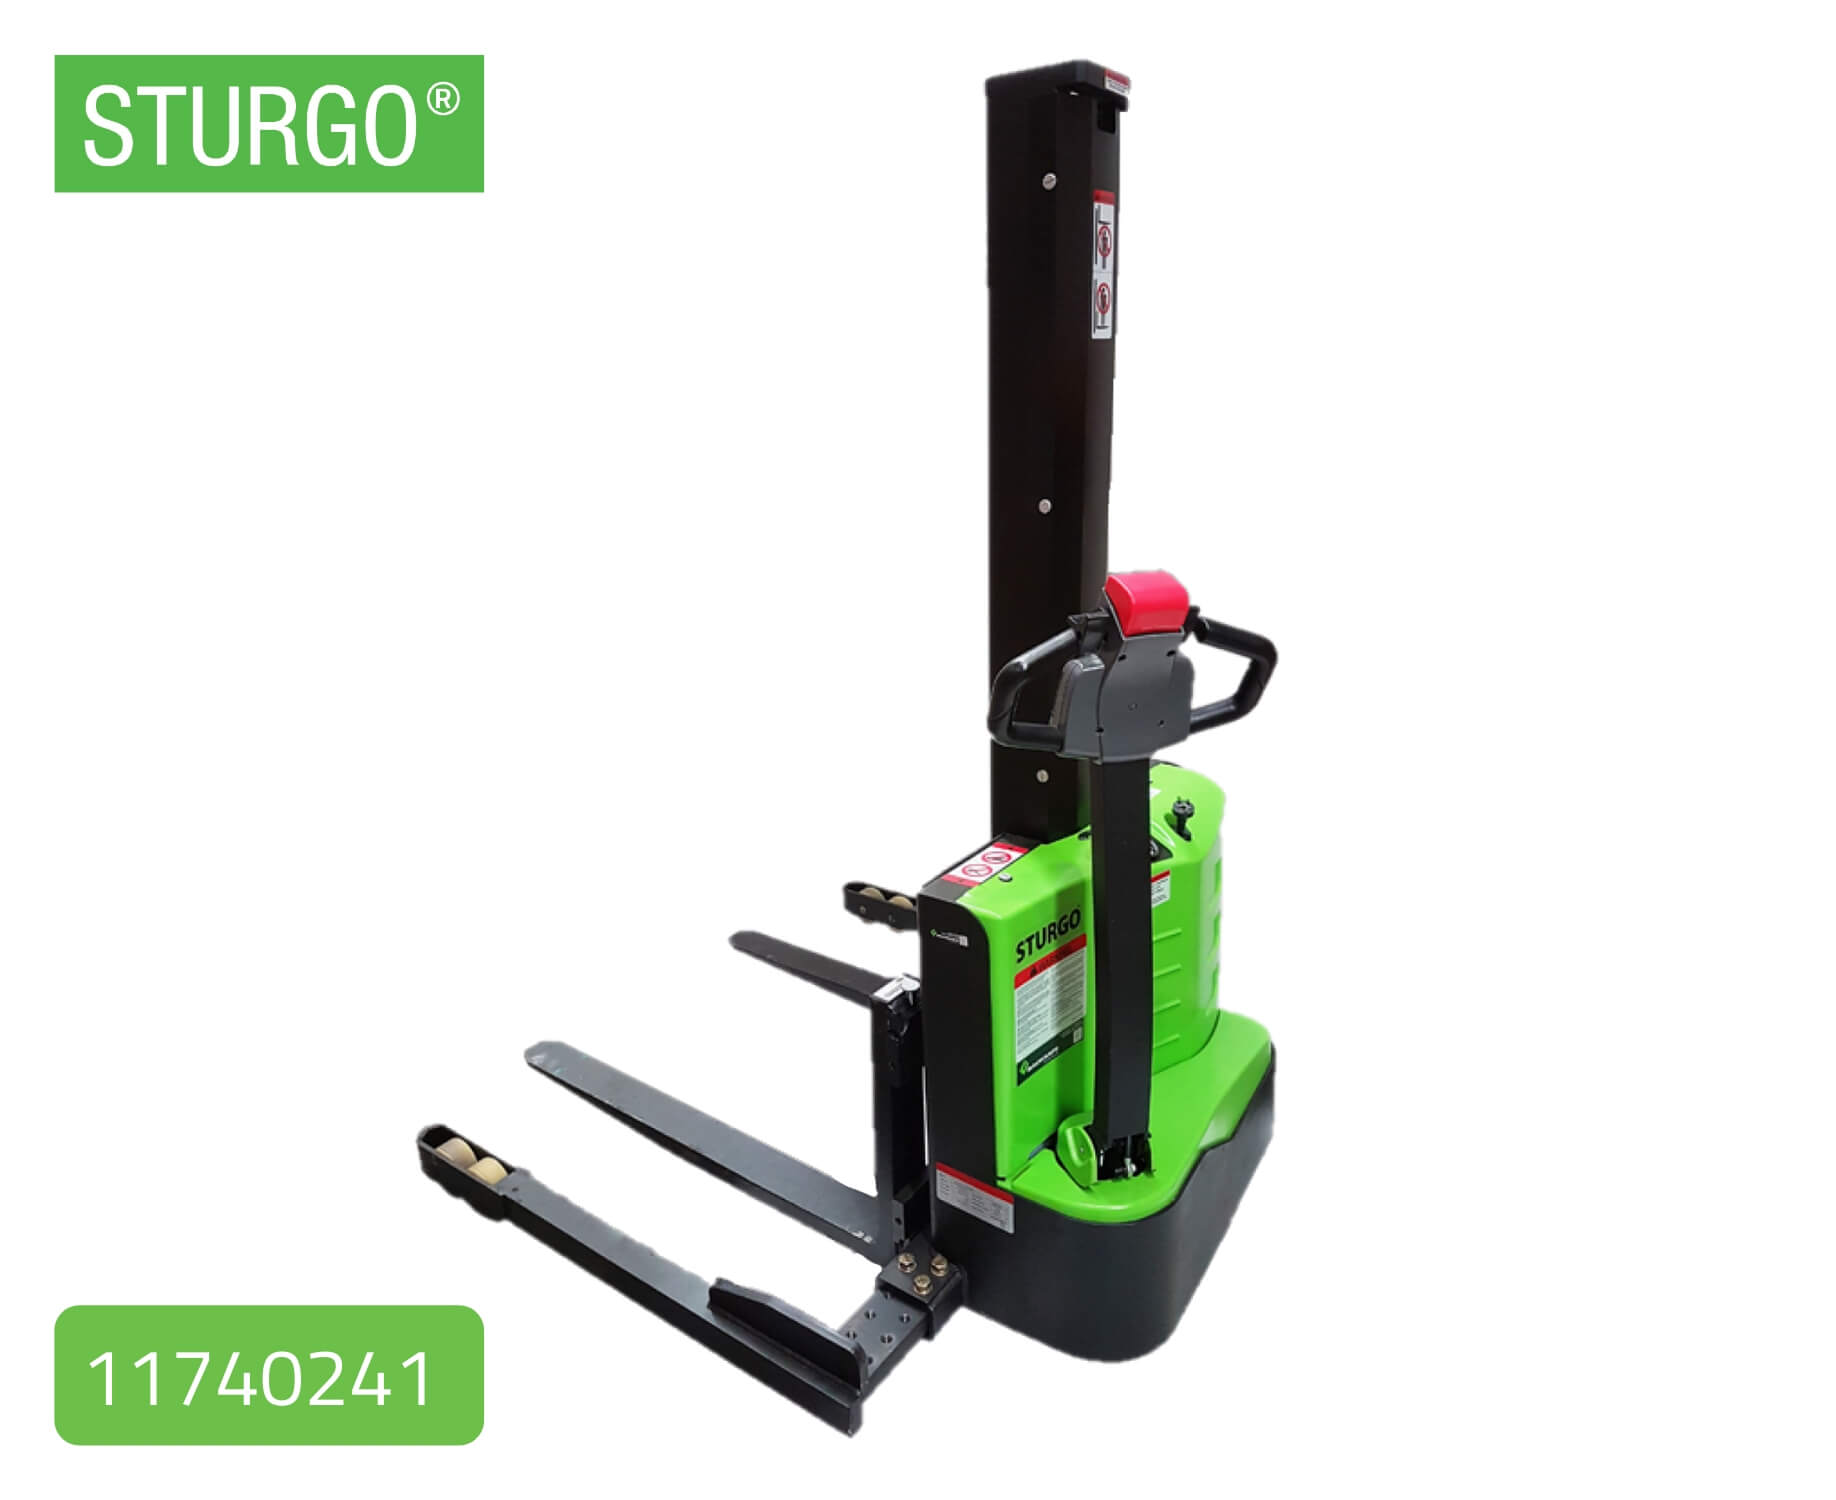 STURGO® Compact Electric Straddle Stacker